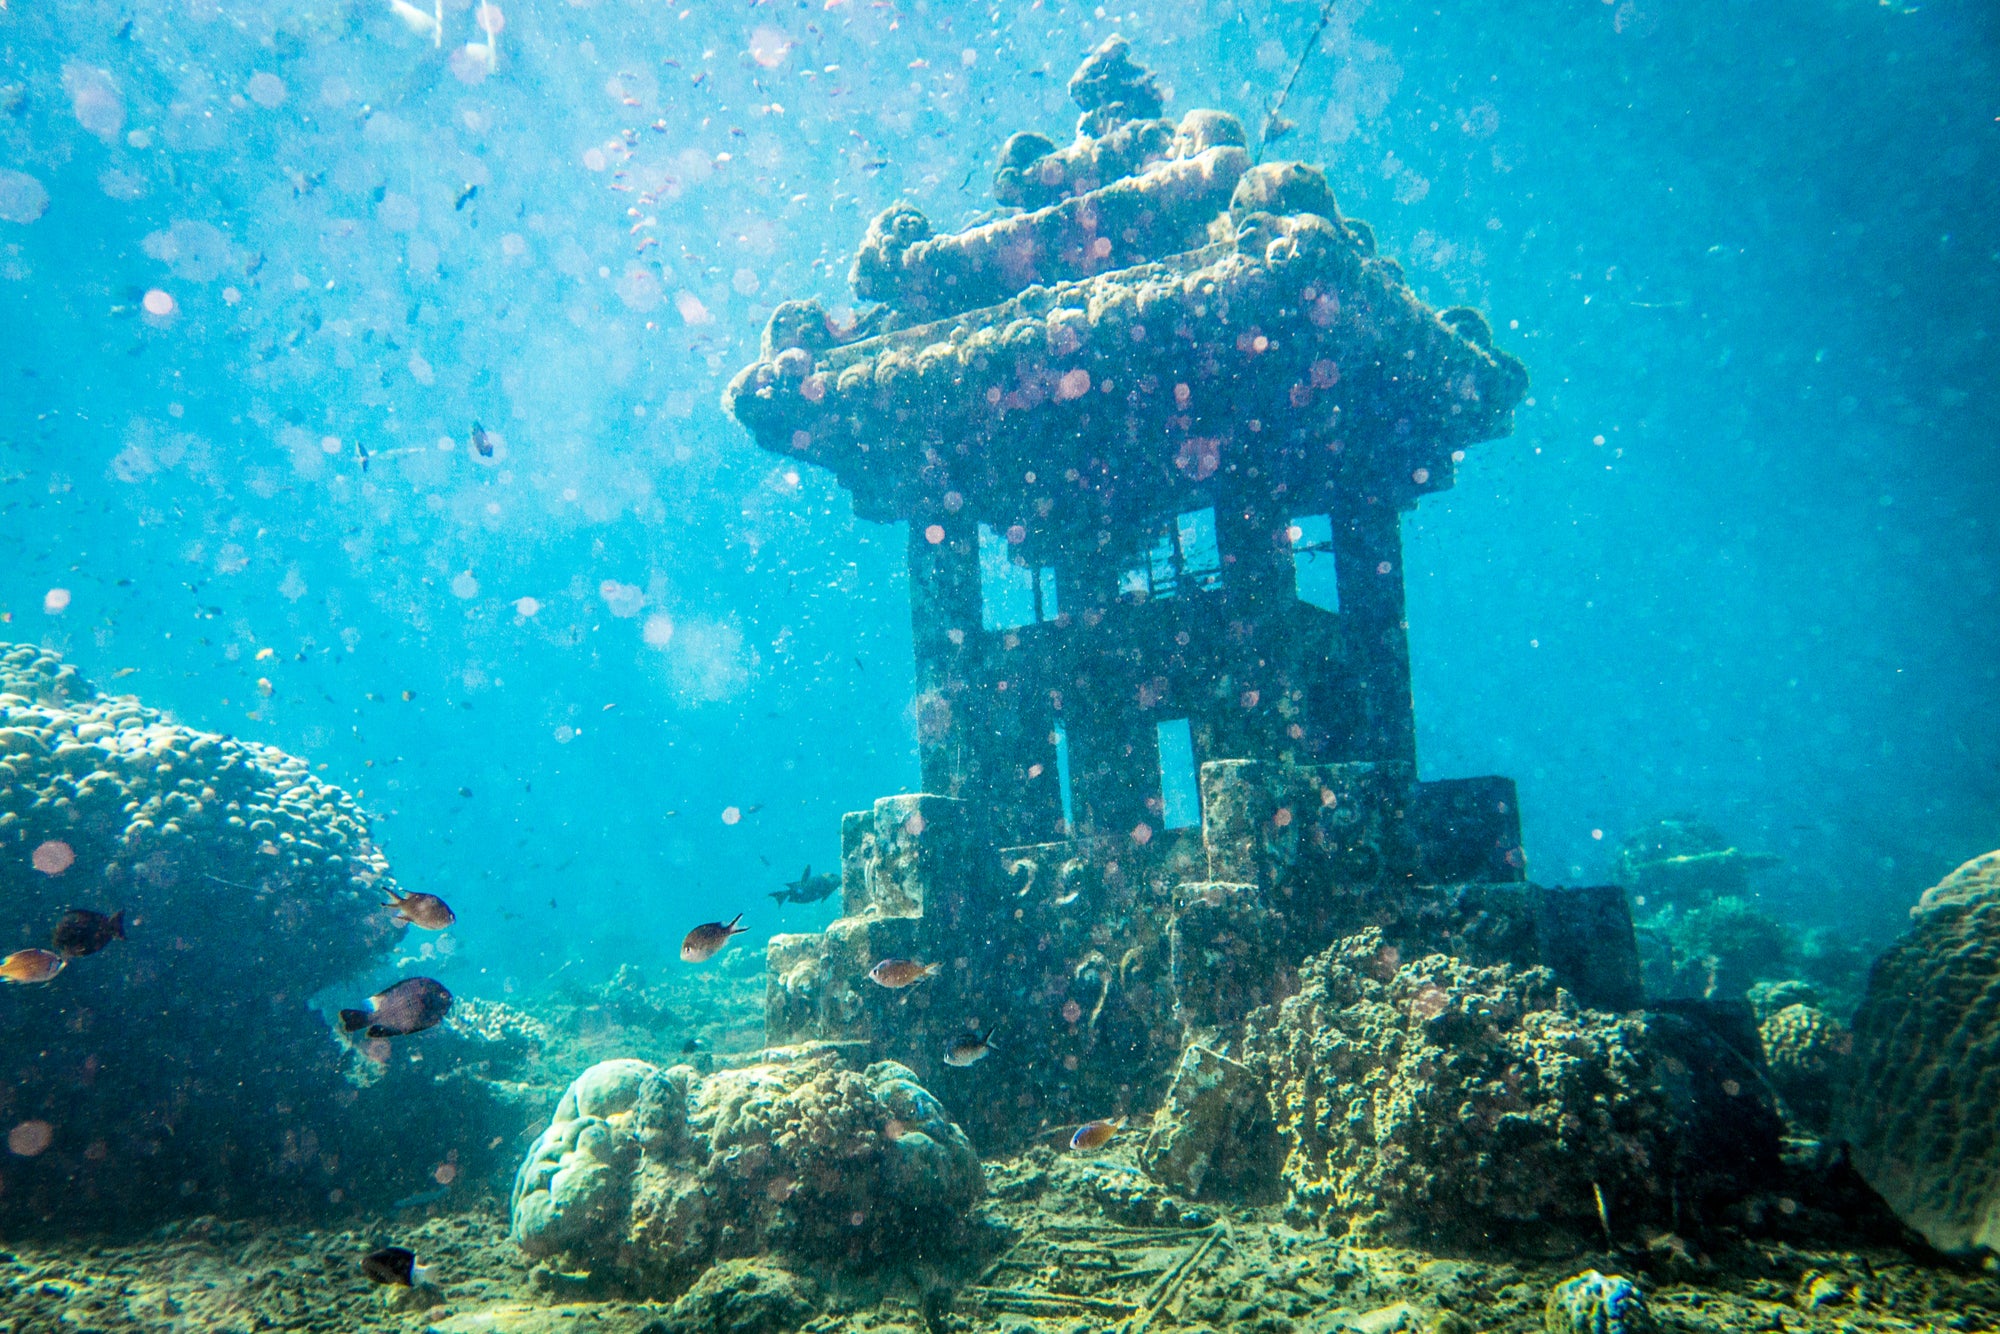 Tulamben is one of the island’s famous diving spots